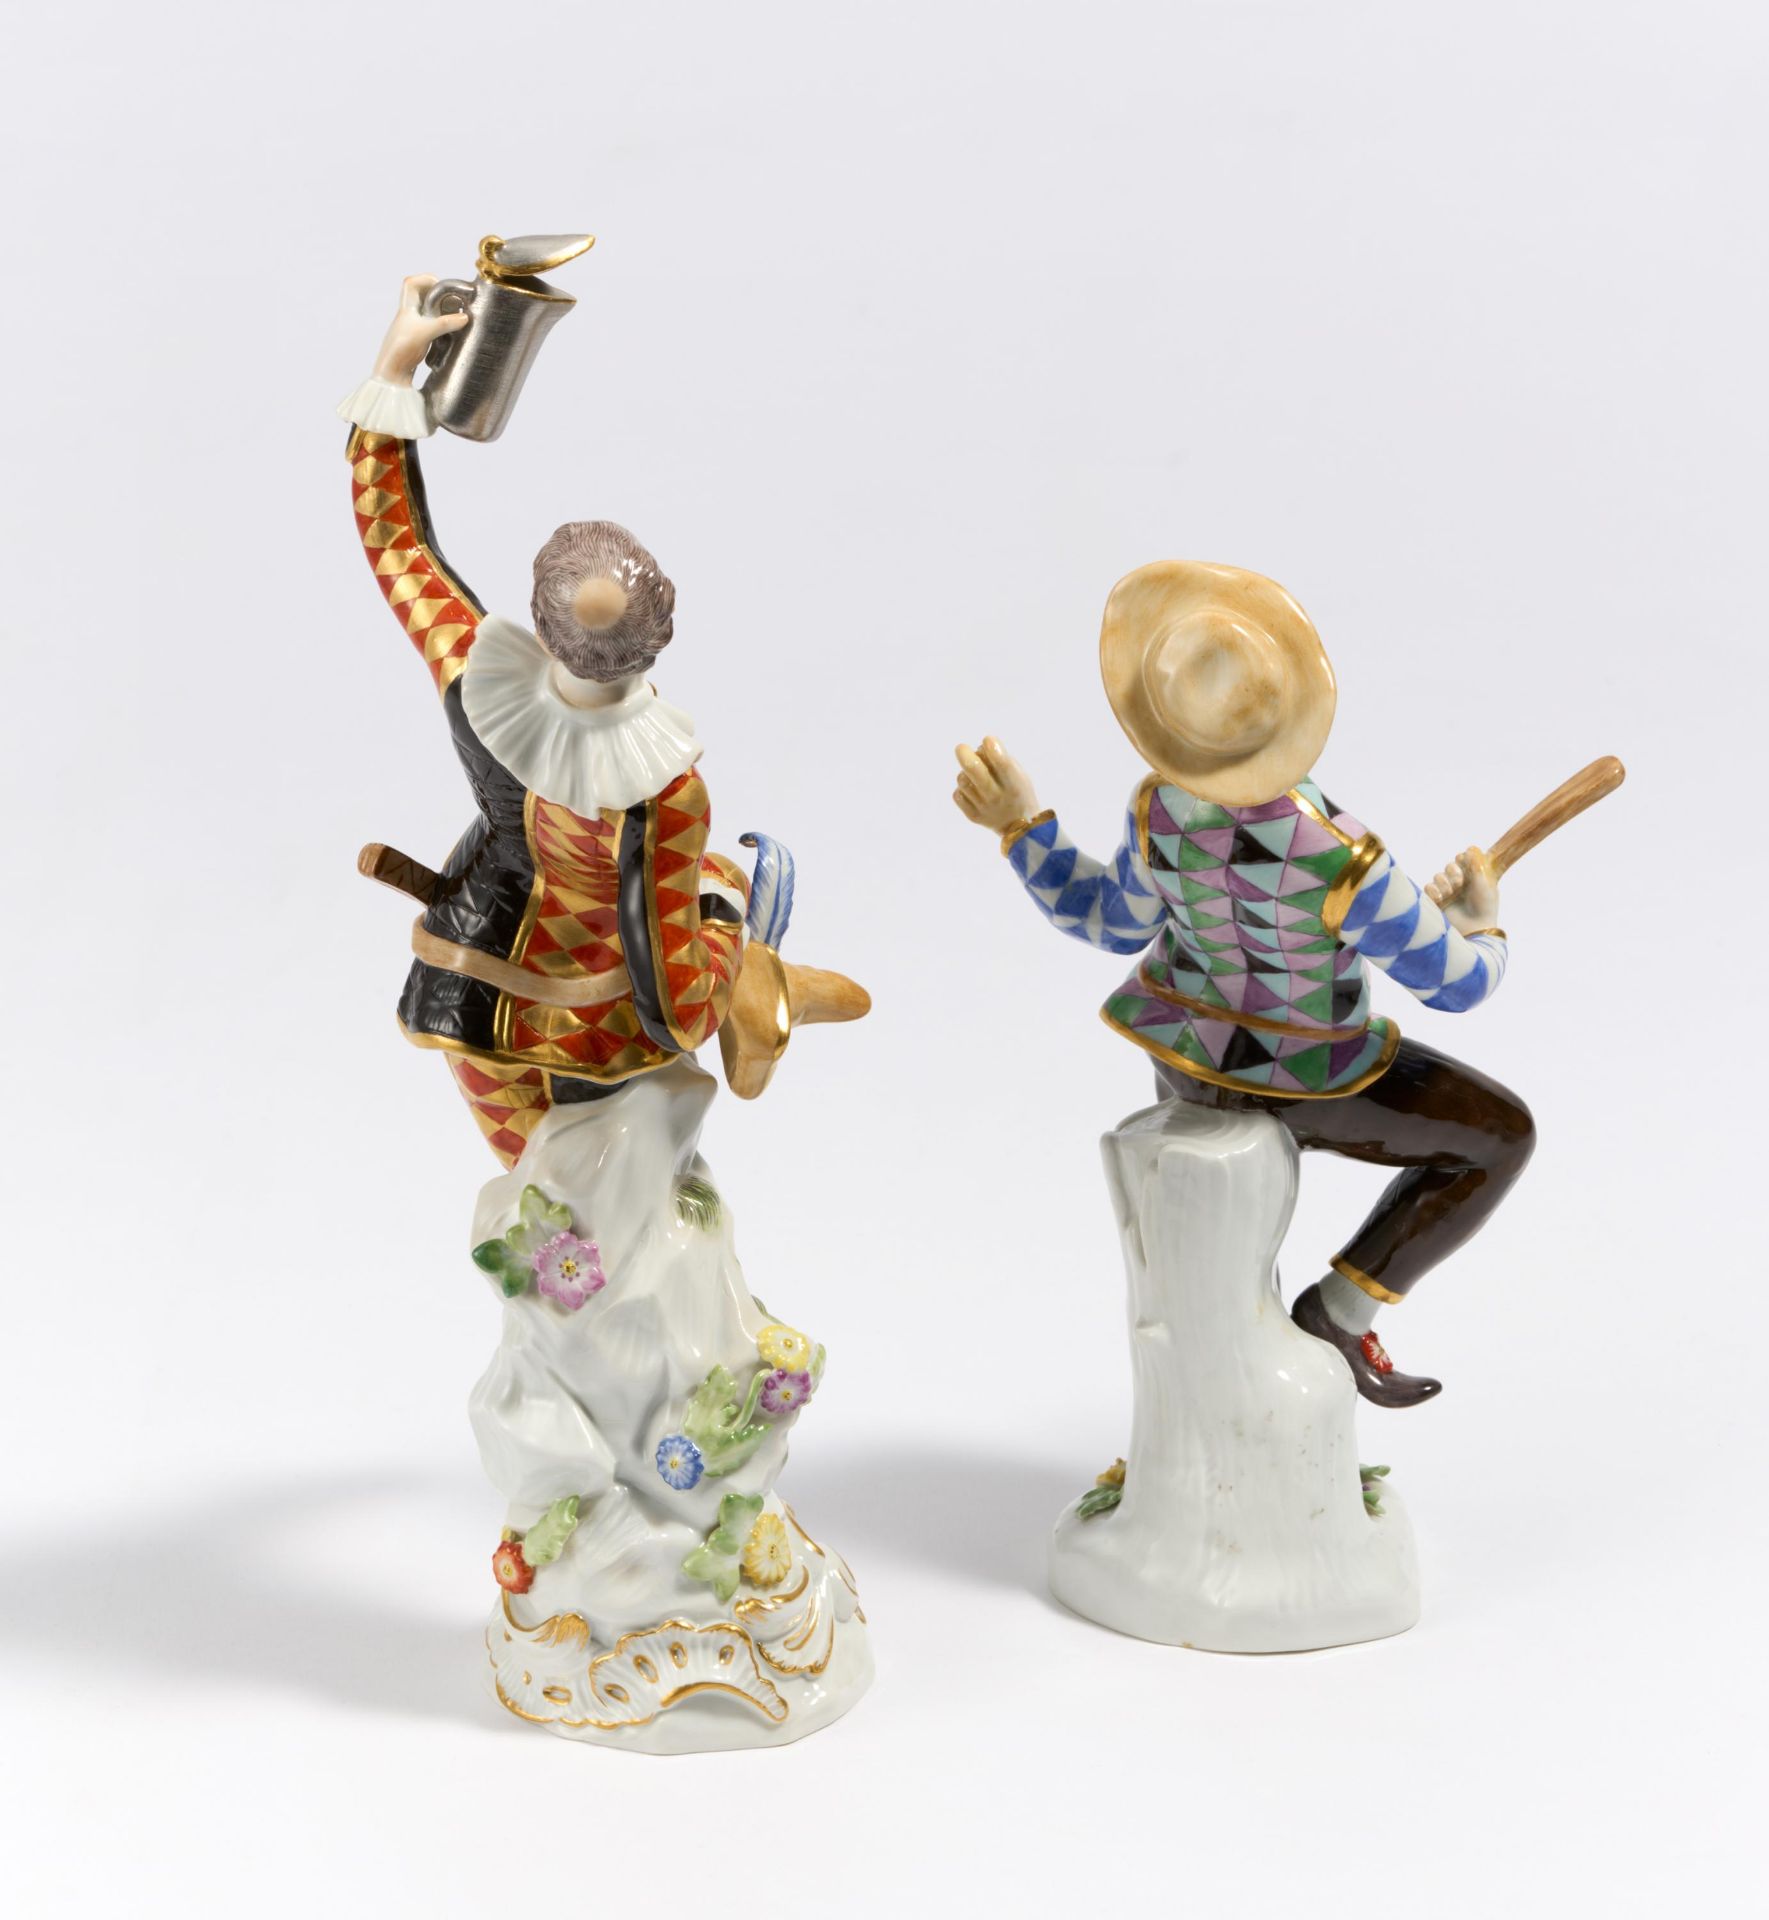 Harlequin with jug and Harlequin with slapstick from the Commedia dell'Arte - Image 4 of 6